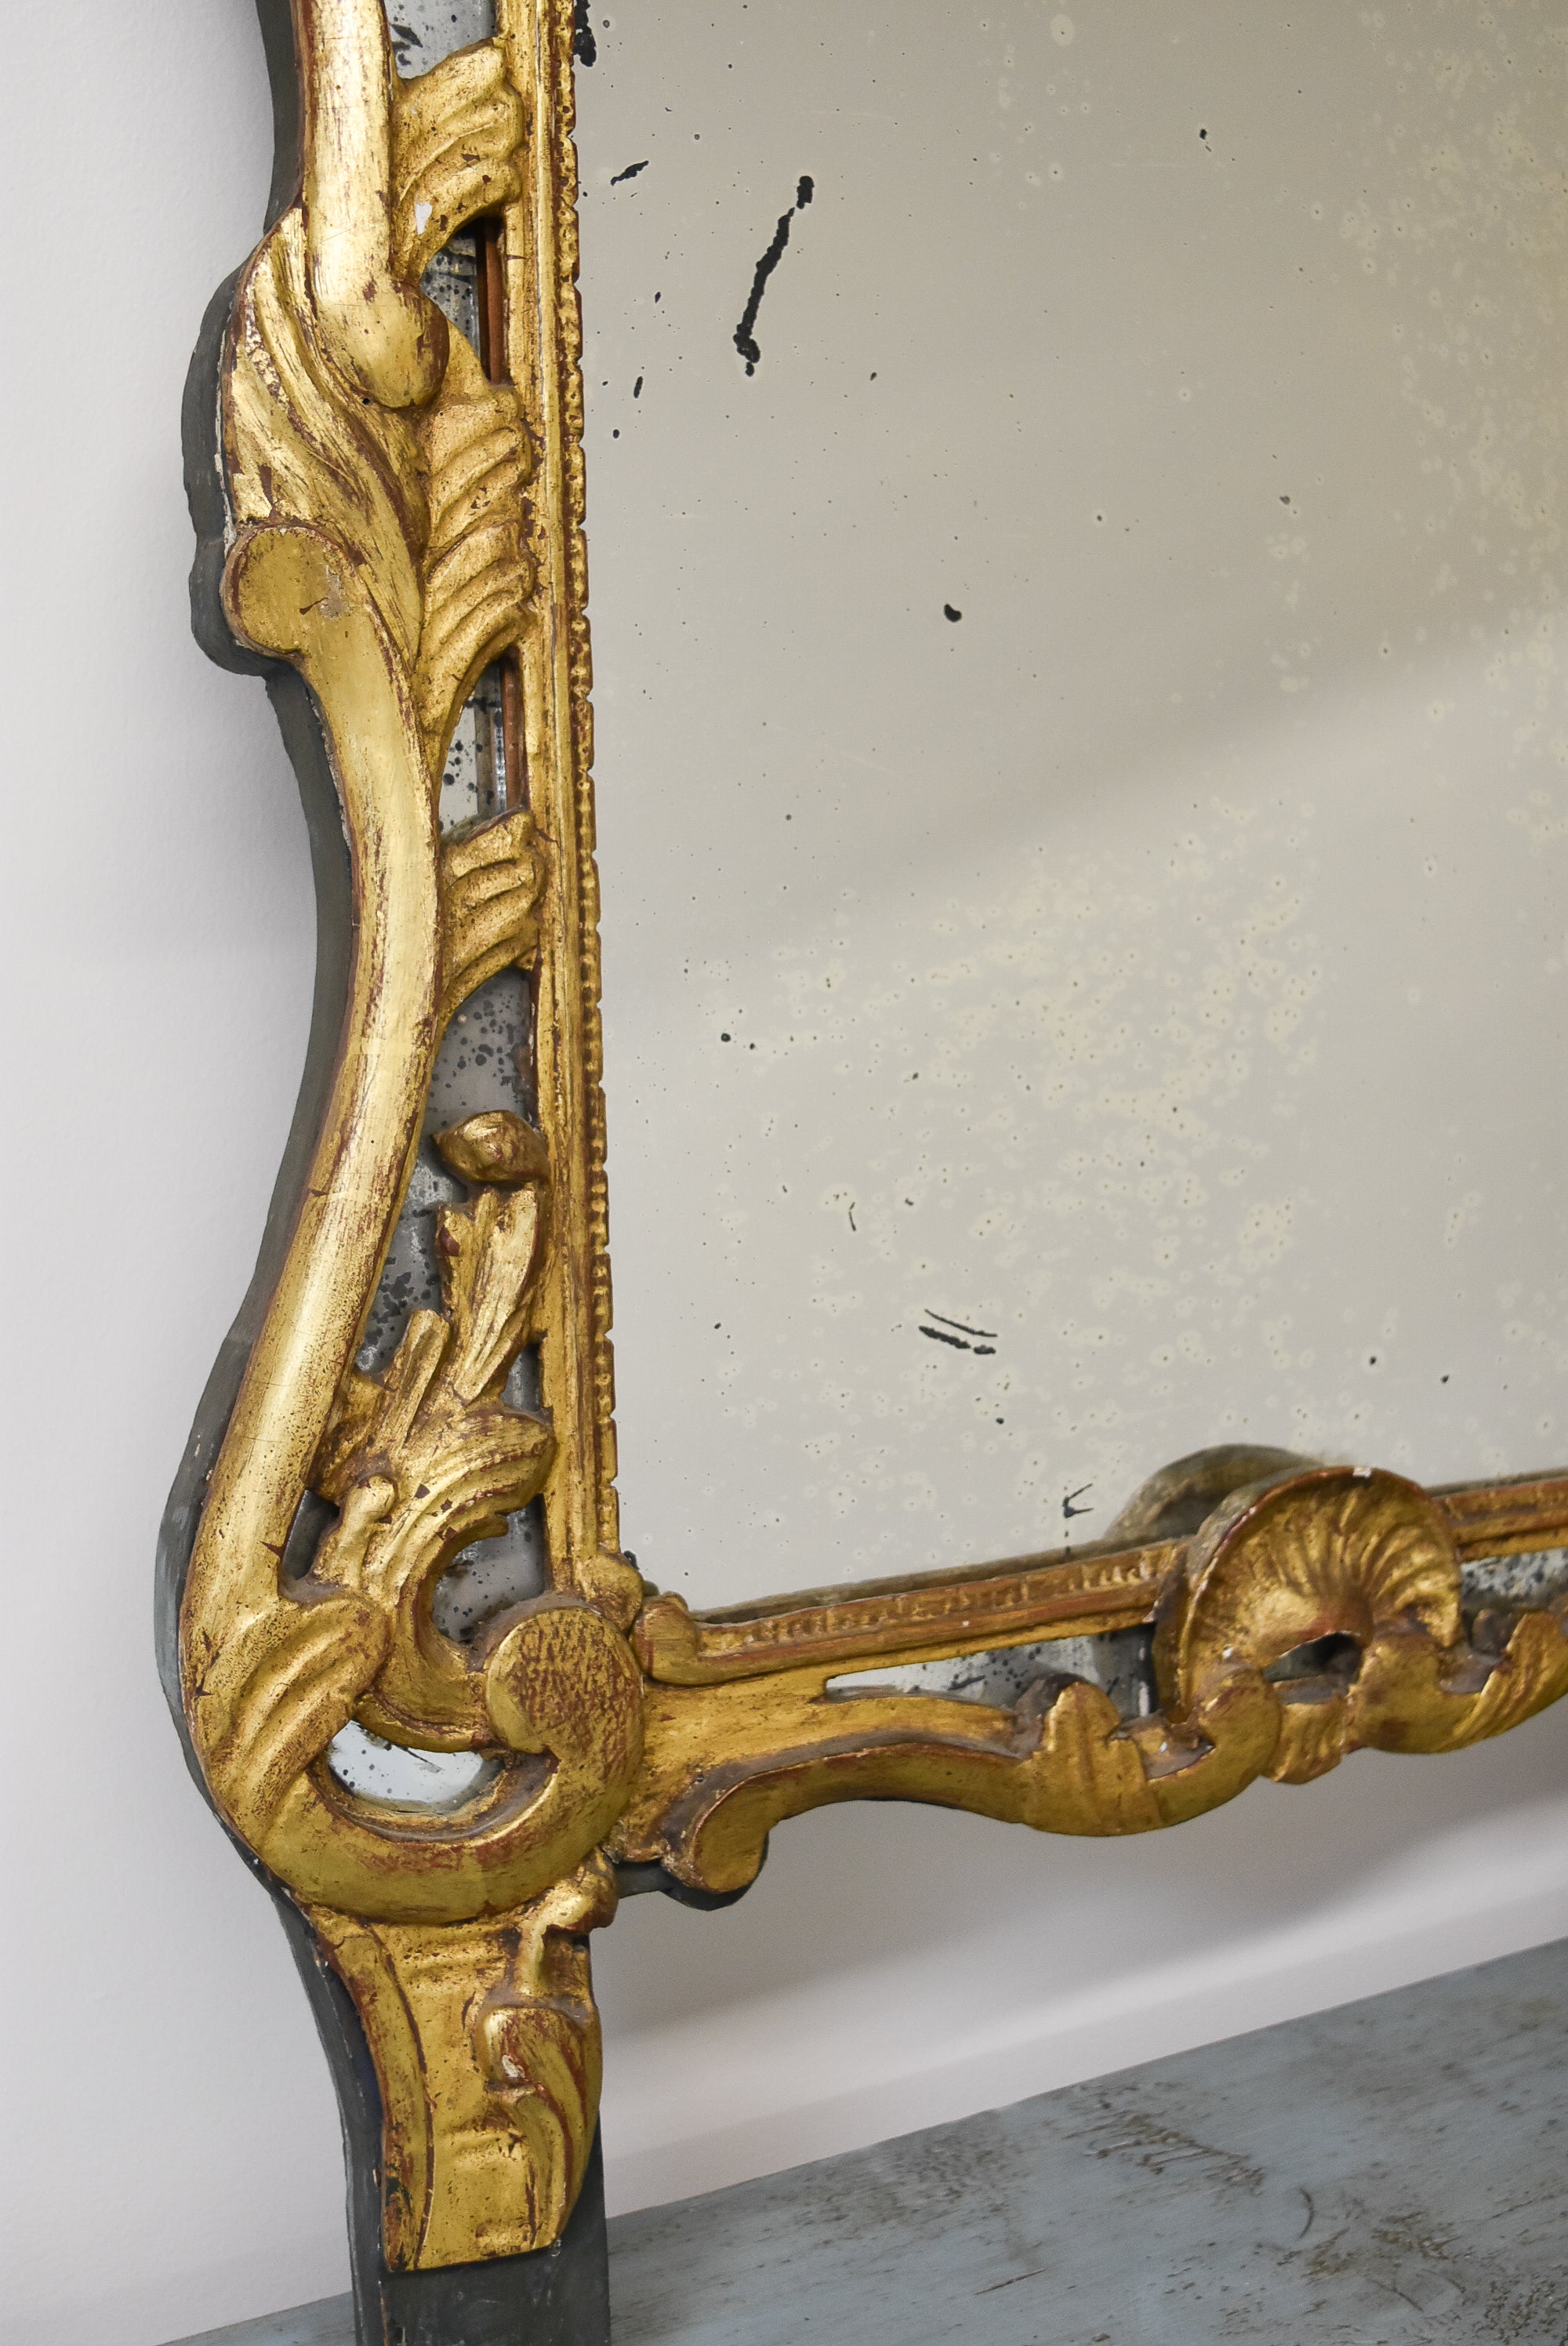 Early 18th Century Louis XIV Style Giltwood Parclose Mirror